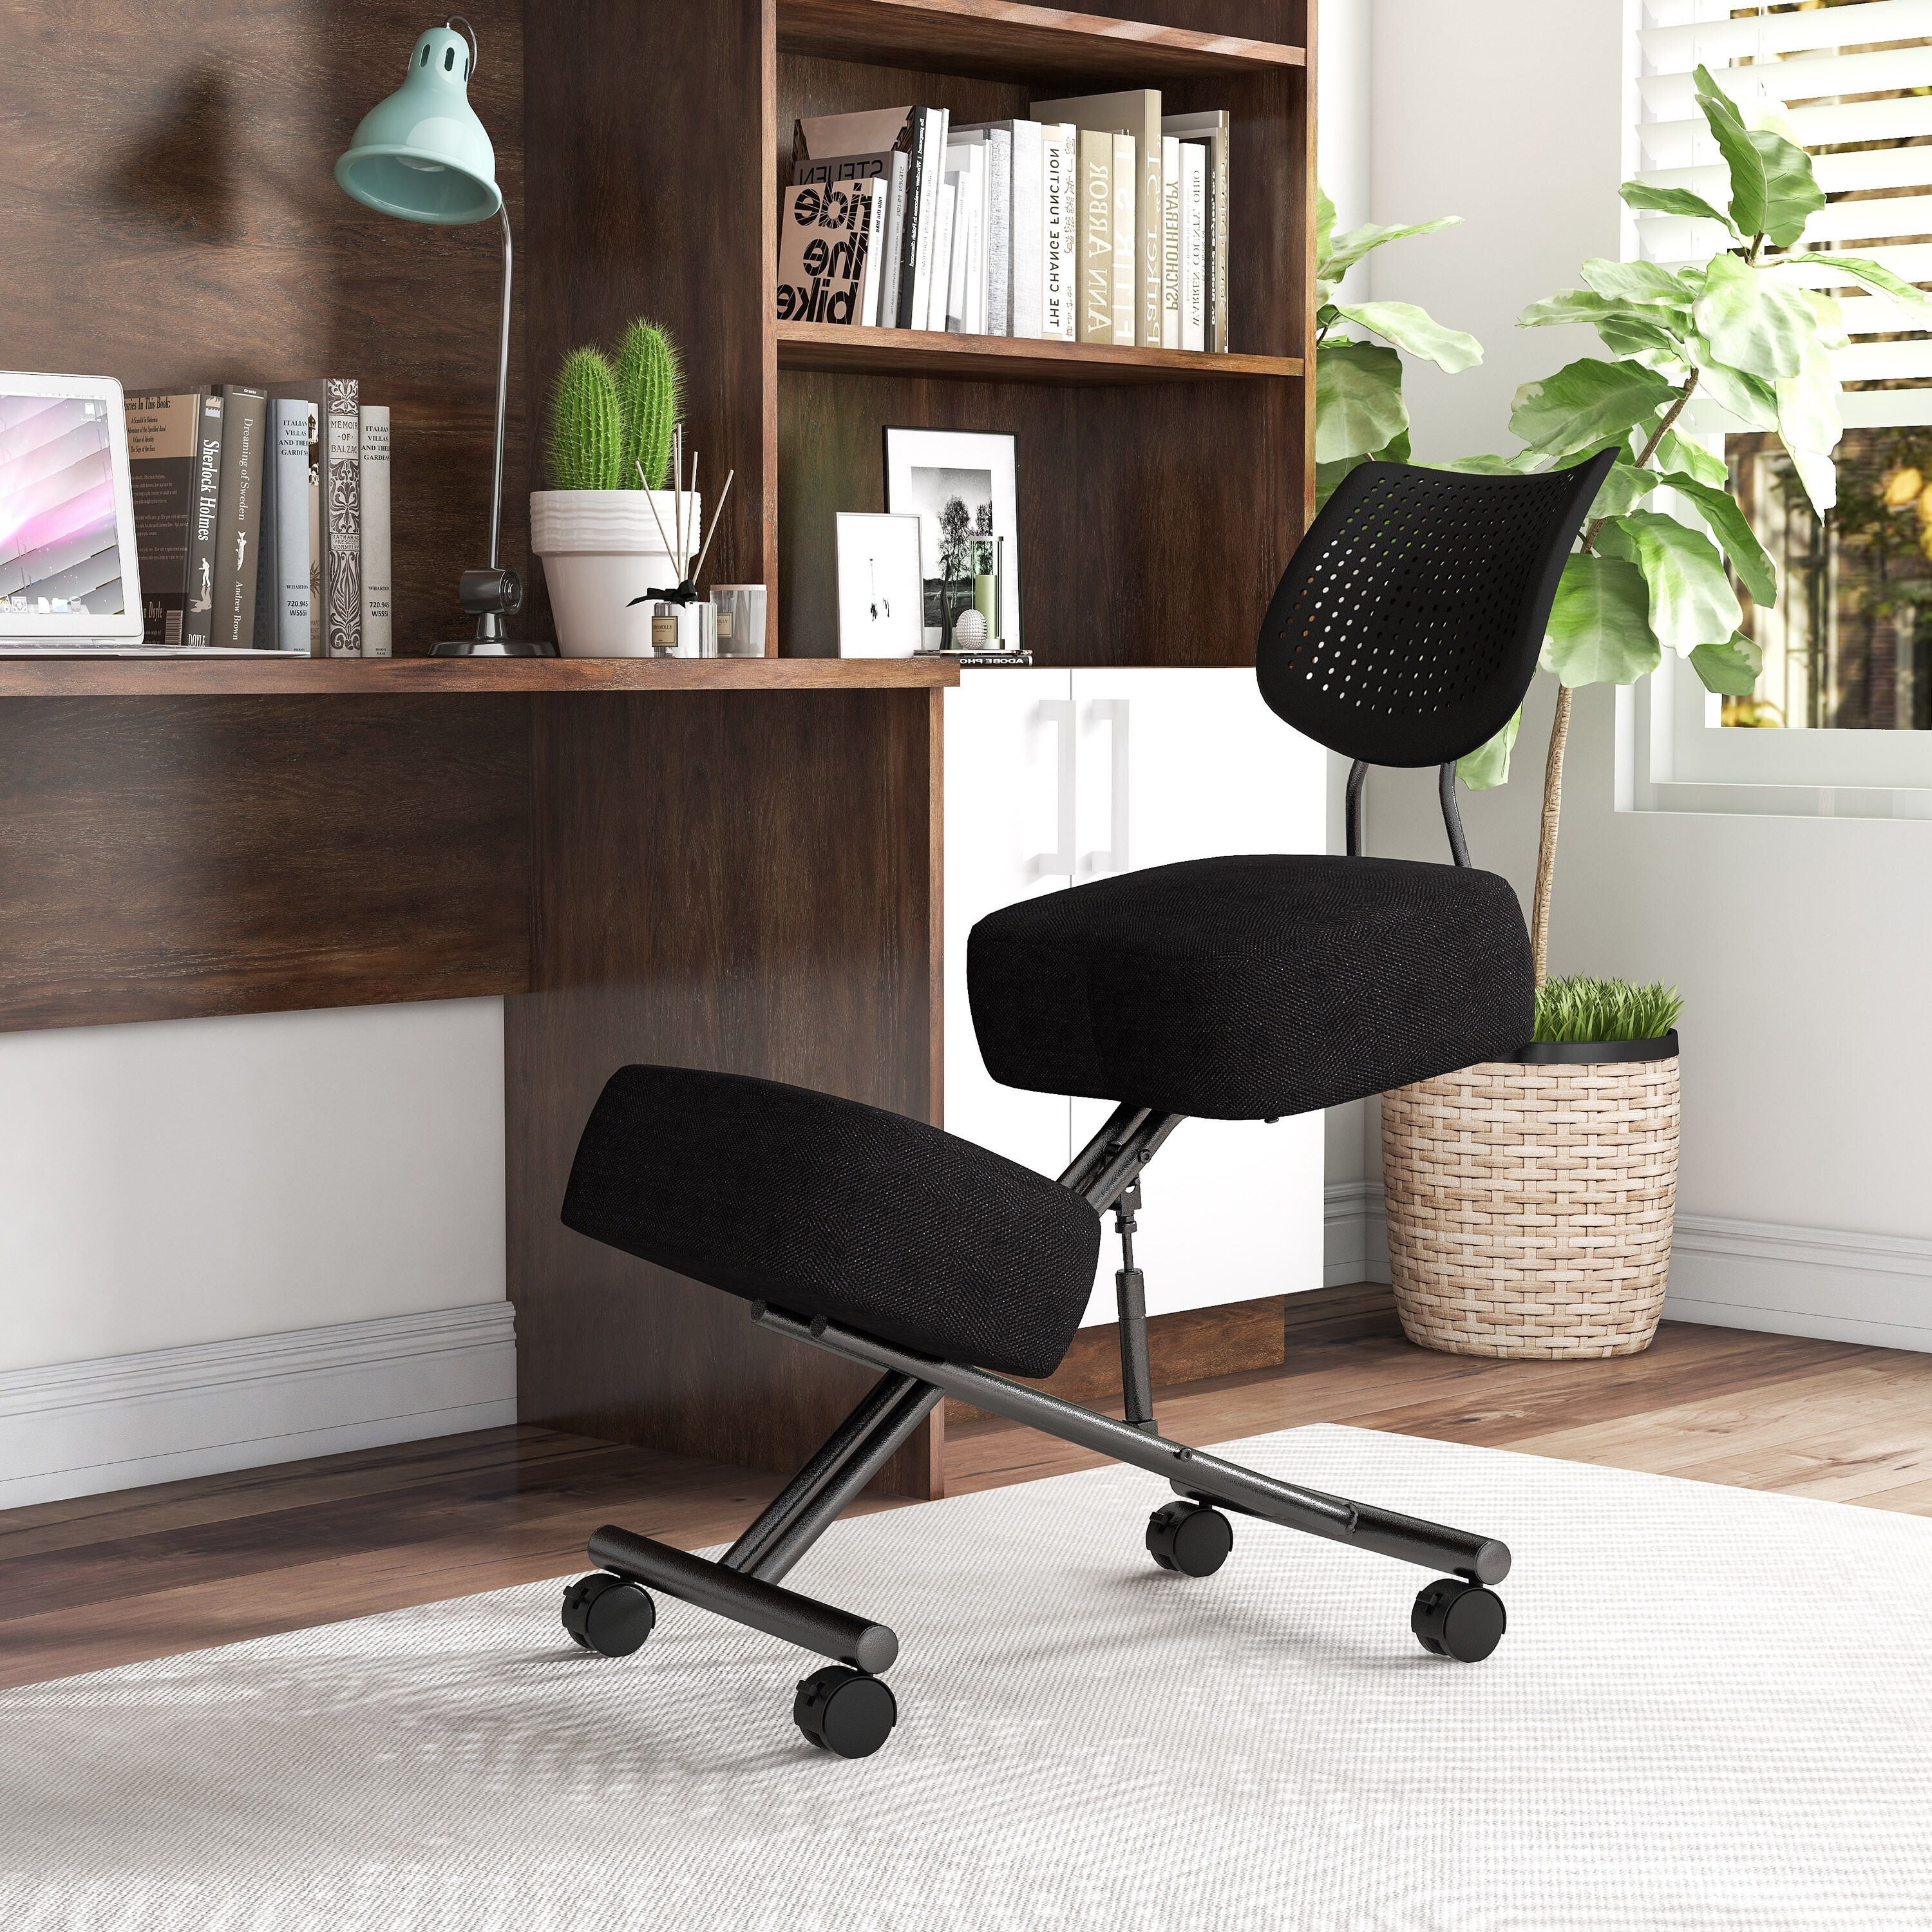 The Best Office Chairs for 2022 – KINNLS